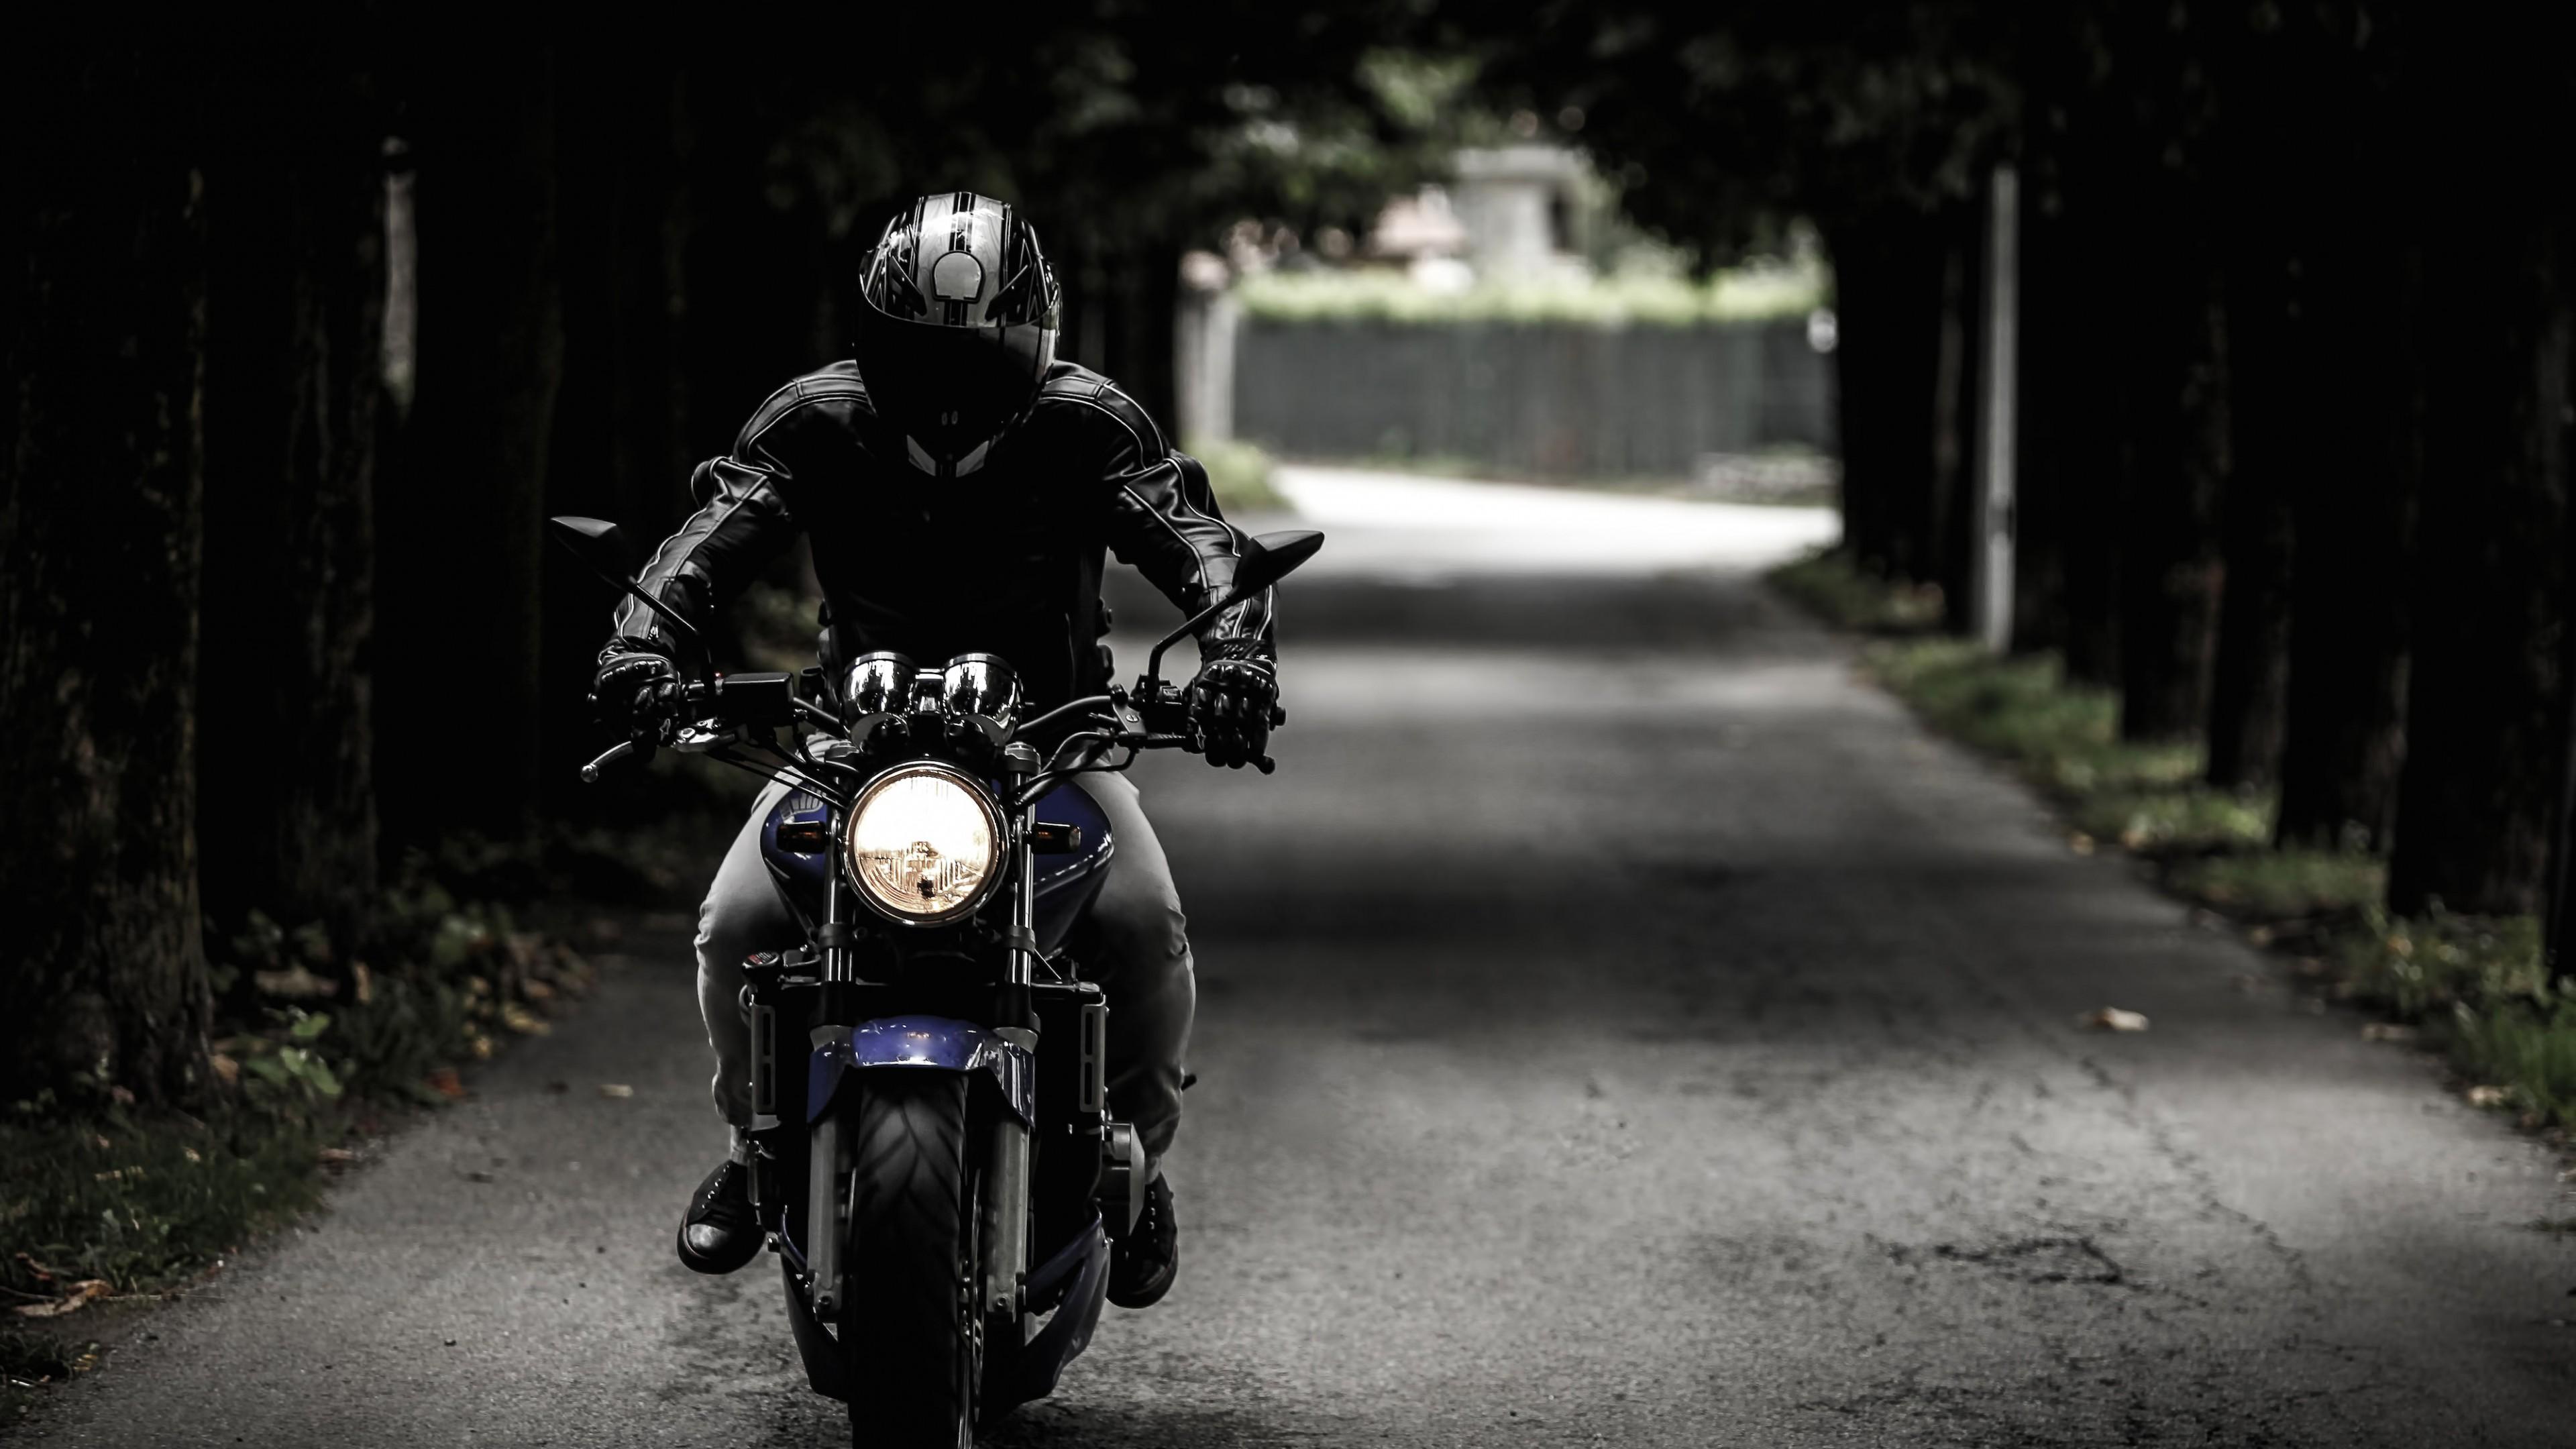 Bike 4K wallpaper for your desktop or mobile screen free and easy